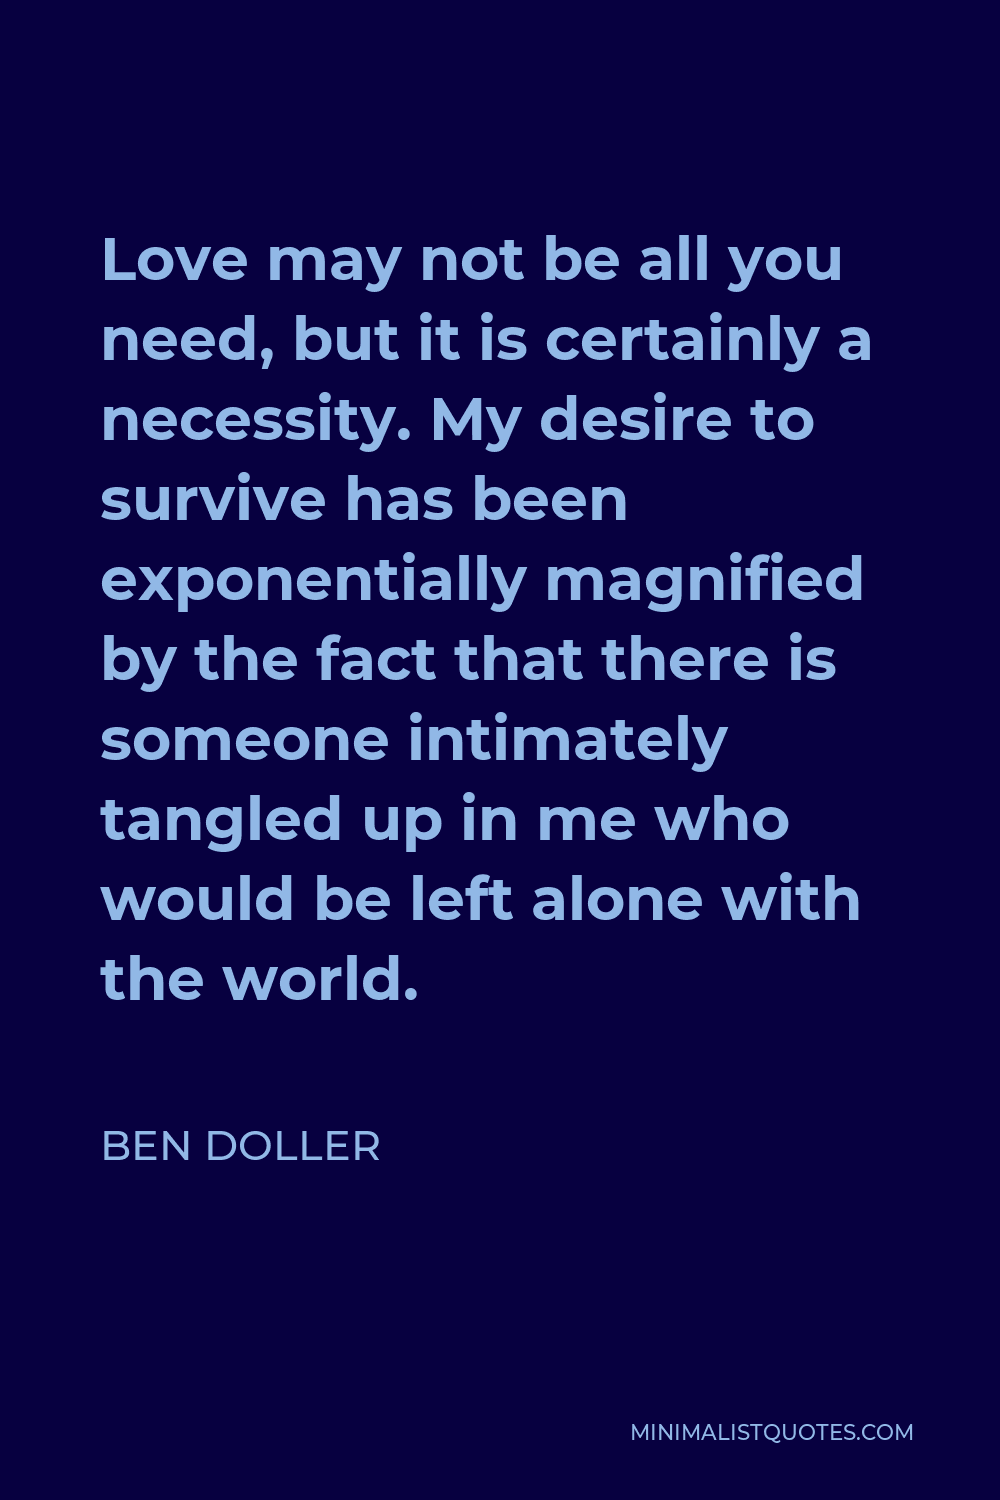 Ben Doller Quote - Love may not be all you need, but it is certainly a necessity. My desire to survive has been exponentially magnified by the fact that there is someone intimately tangled up in me who would be left alone with the world.